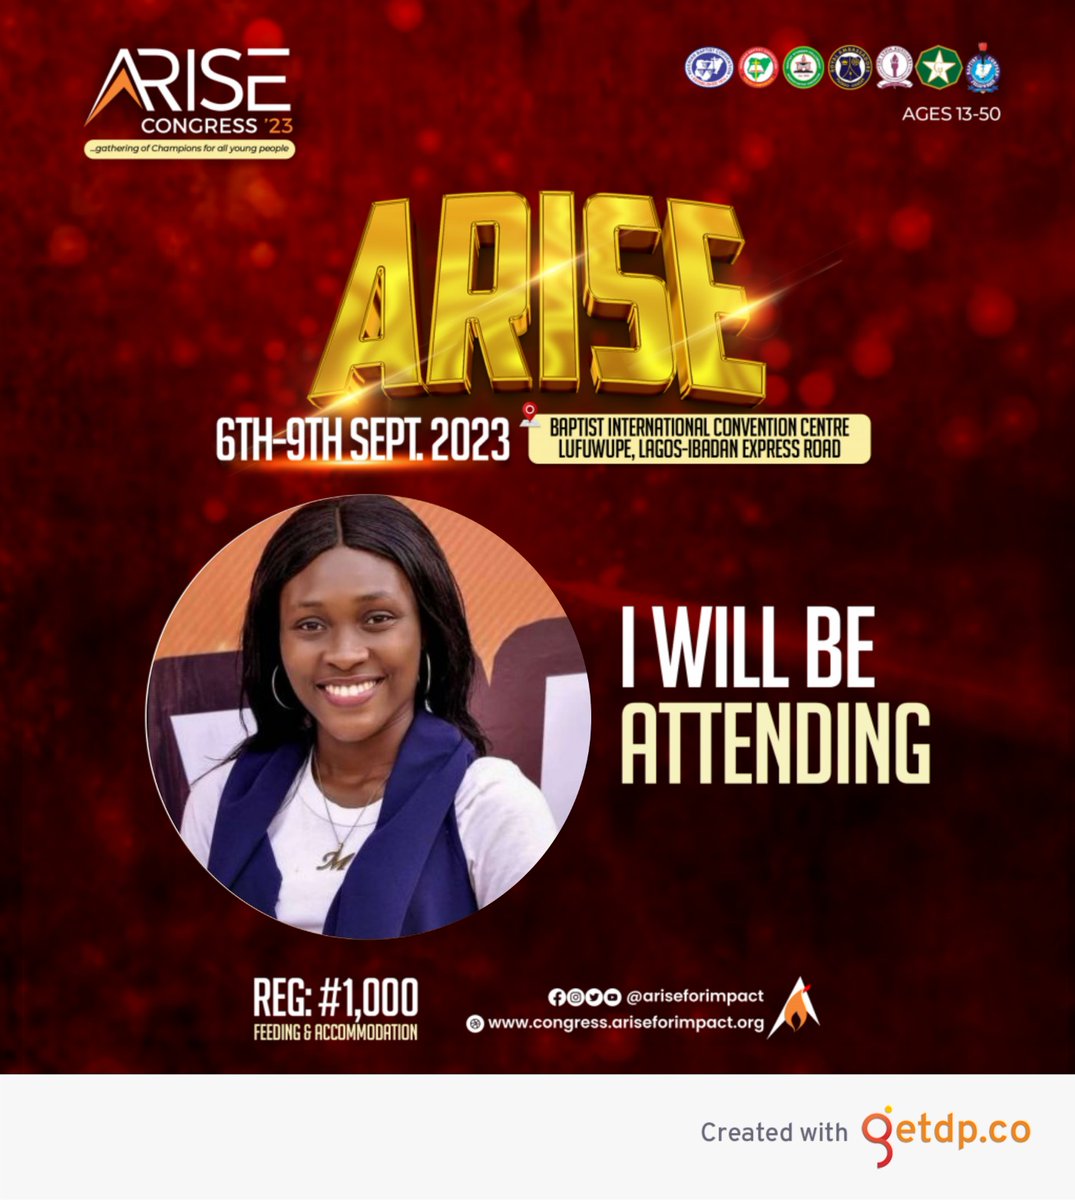 Name: Zippor'ah!
Conference: Kwara

I'll be at Arise congress and I will be serving with the ministers' care Team.

Oya quote this post and I'll be looking forward to see you from Wednesday 😁😁
#AriseCongress 
#ariseforimpact